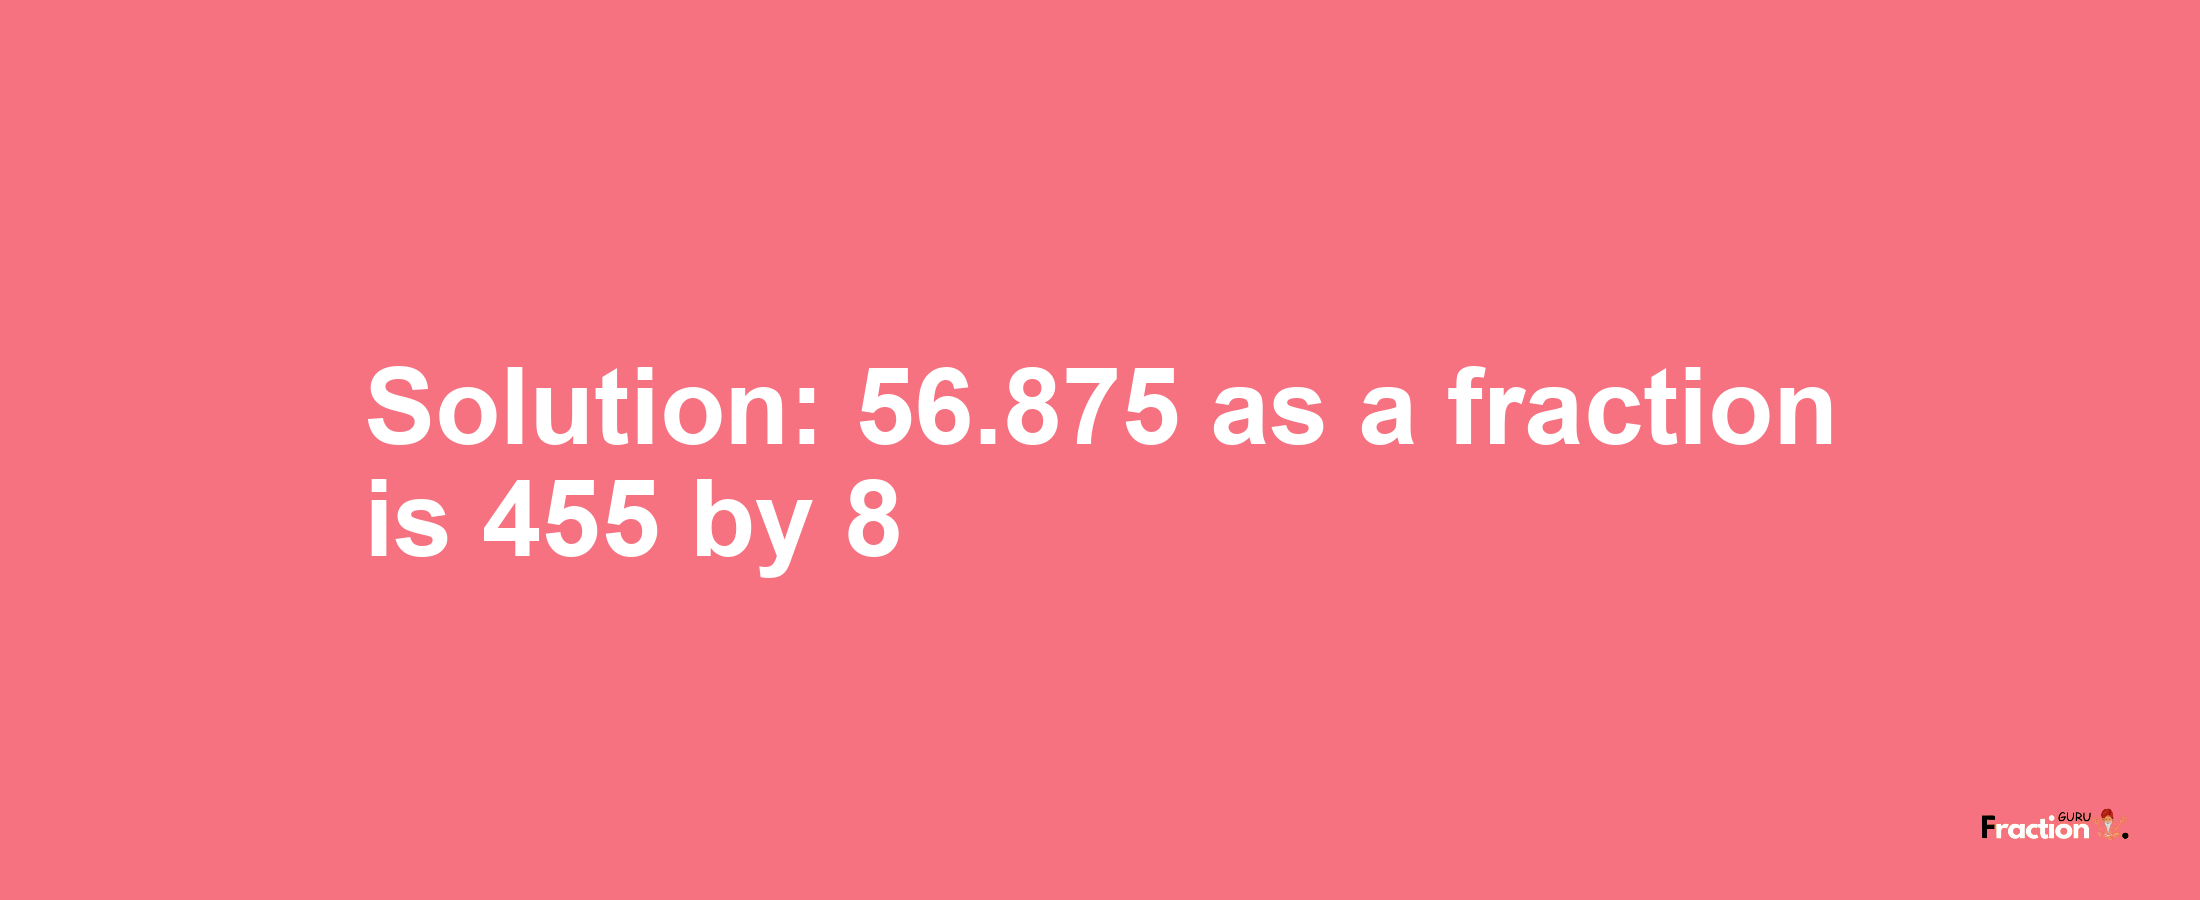 Solution:56.875 as a fraction is 455/8